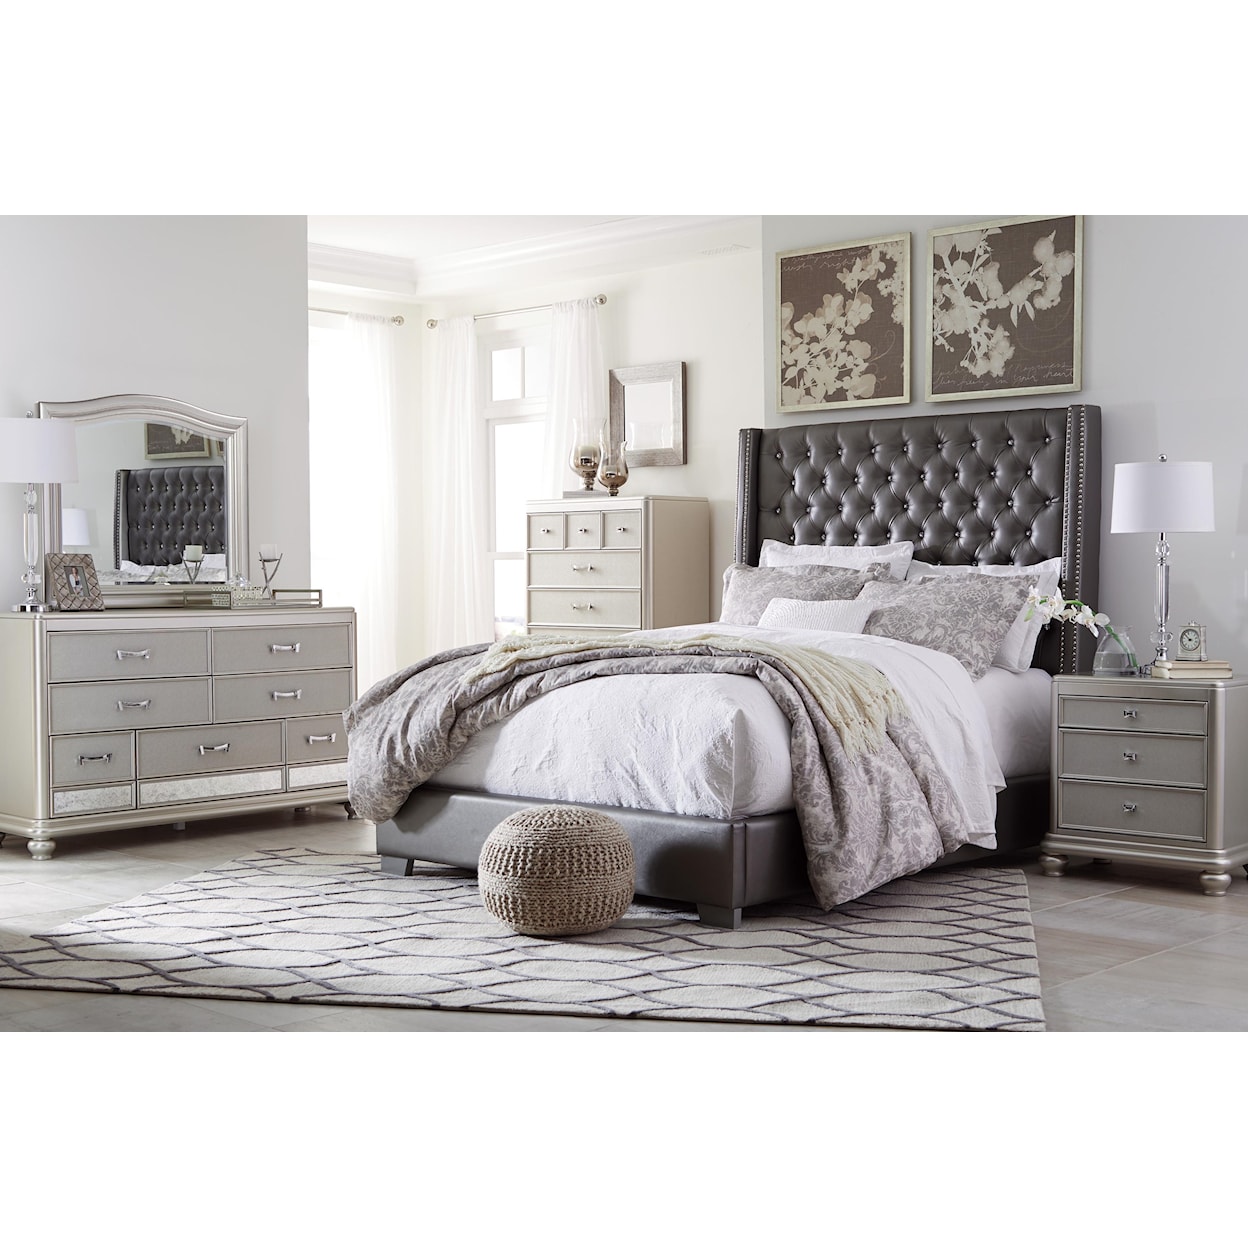 Signature Design by Ashley Coralayne 5 Piece Queen Upholstered Bedroom Set